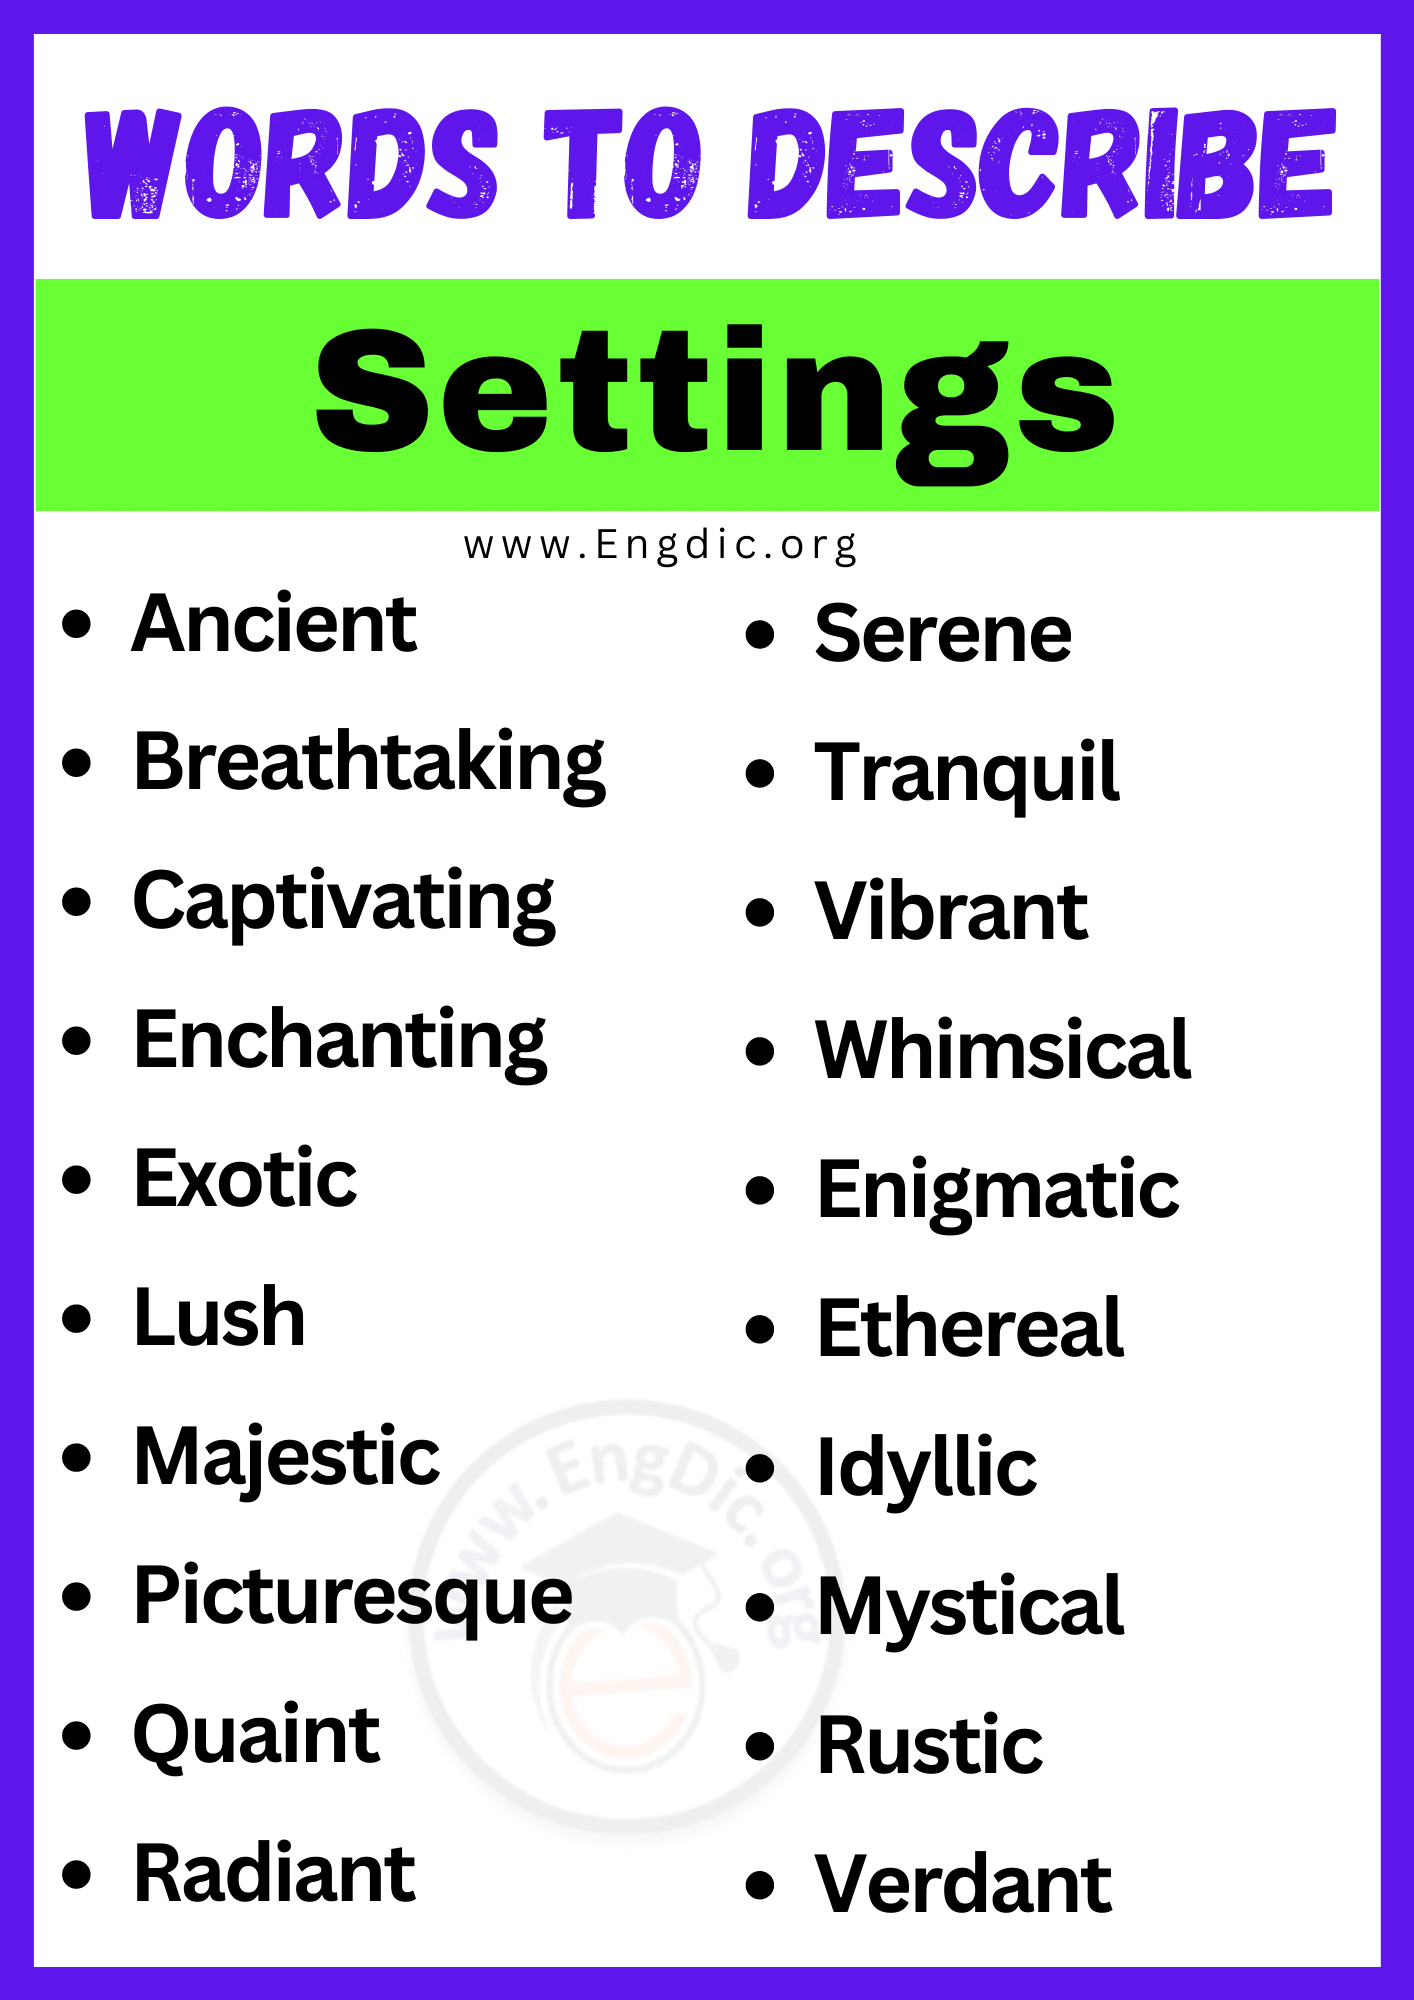 Words to Describe Settings